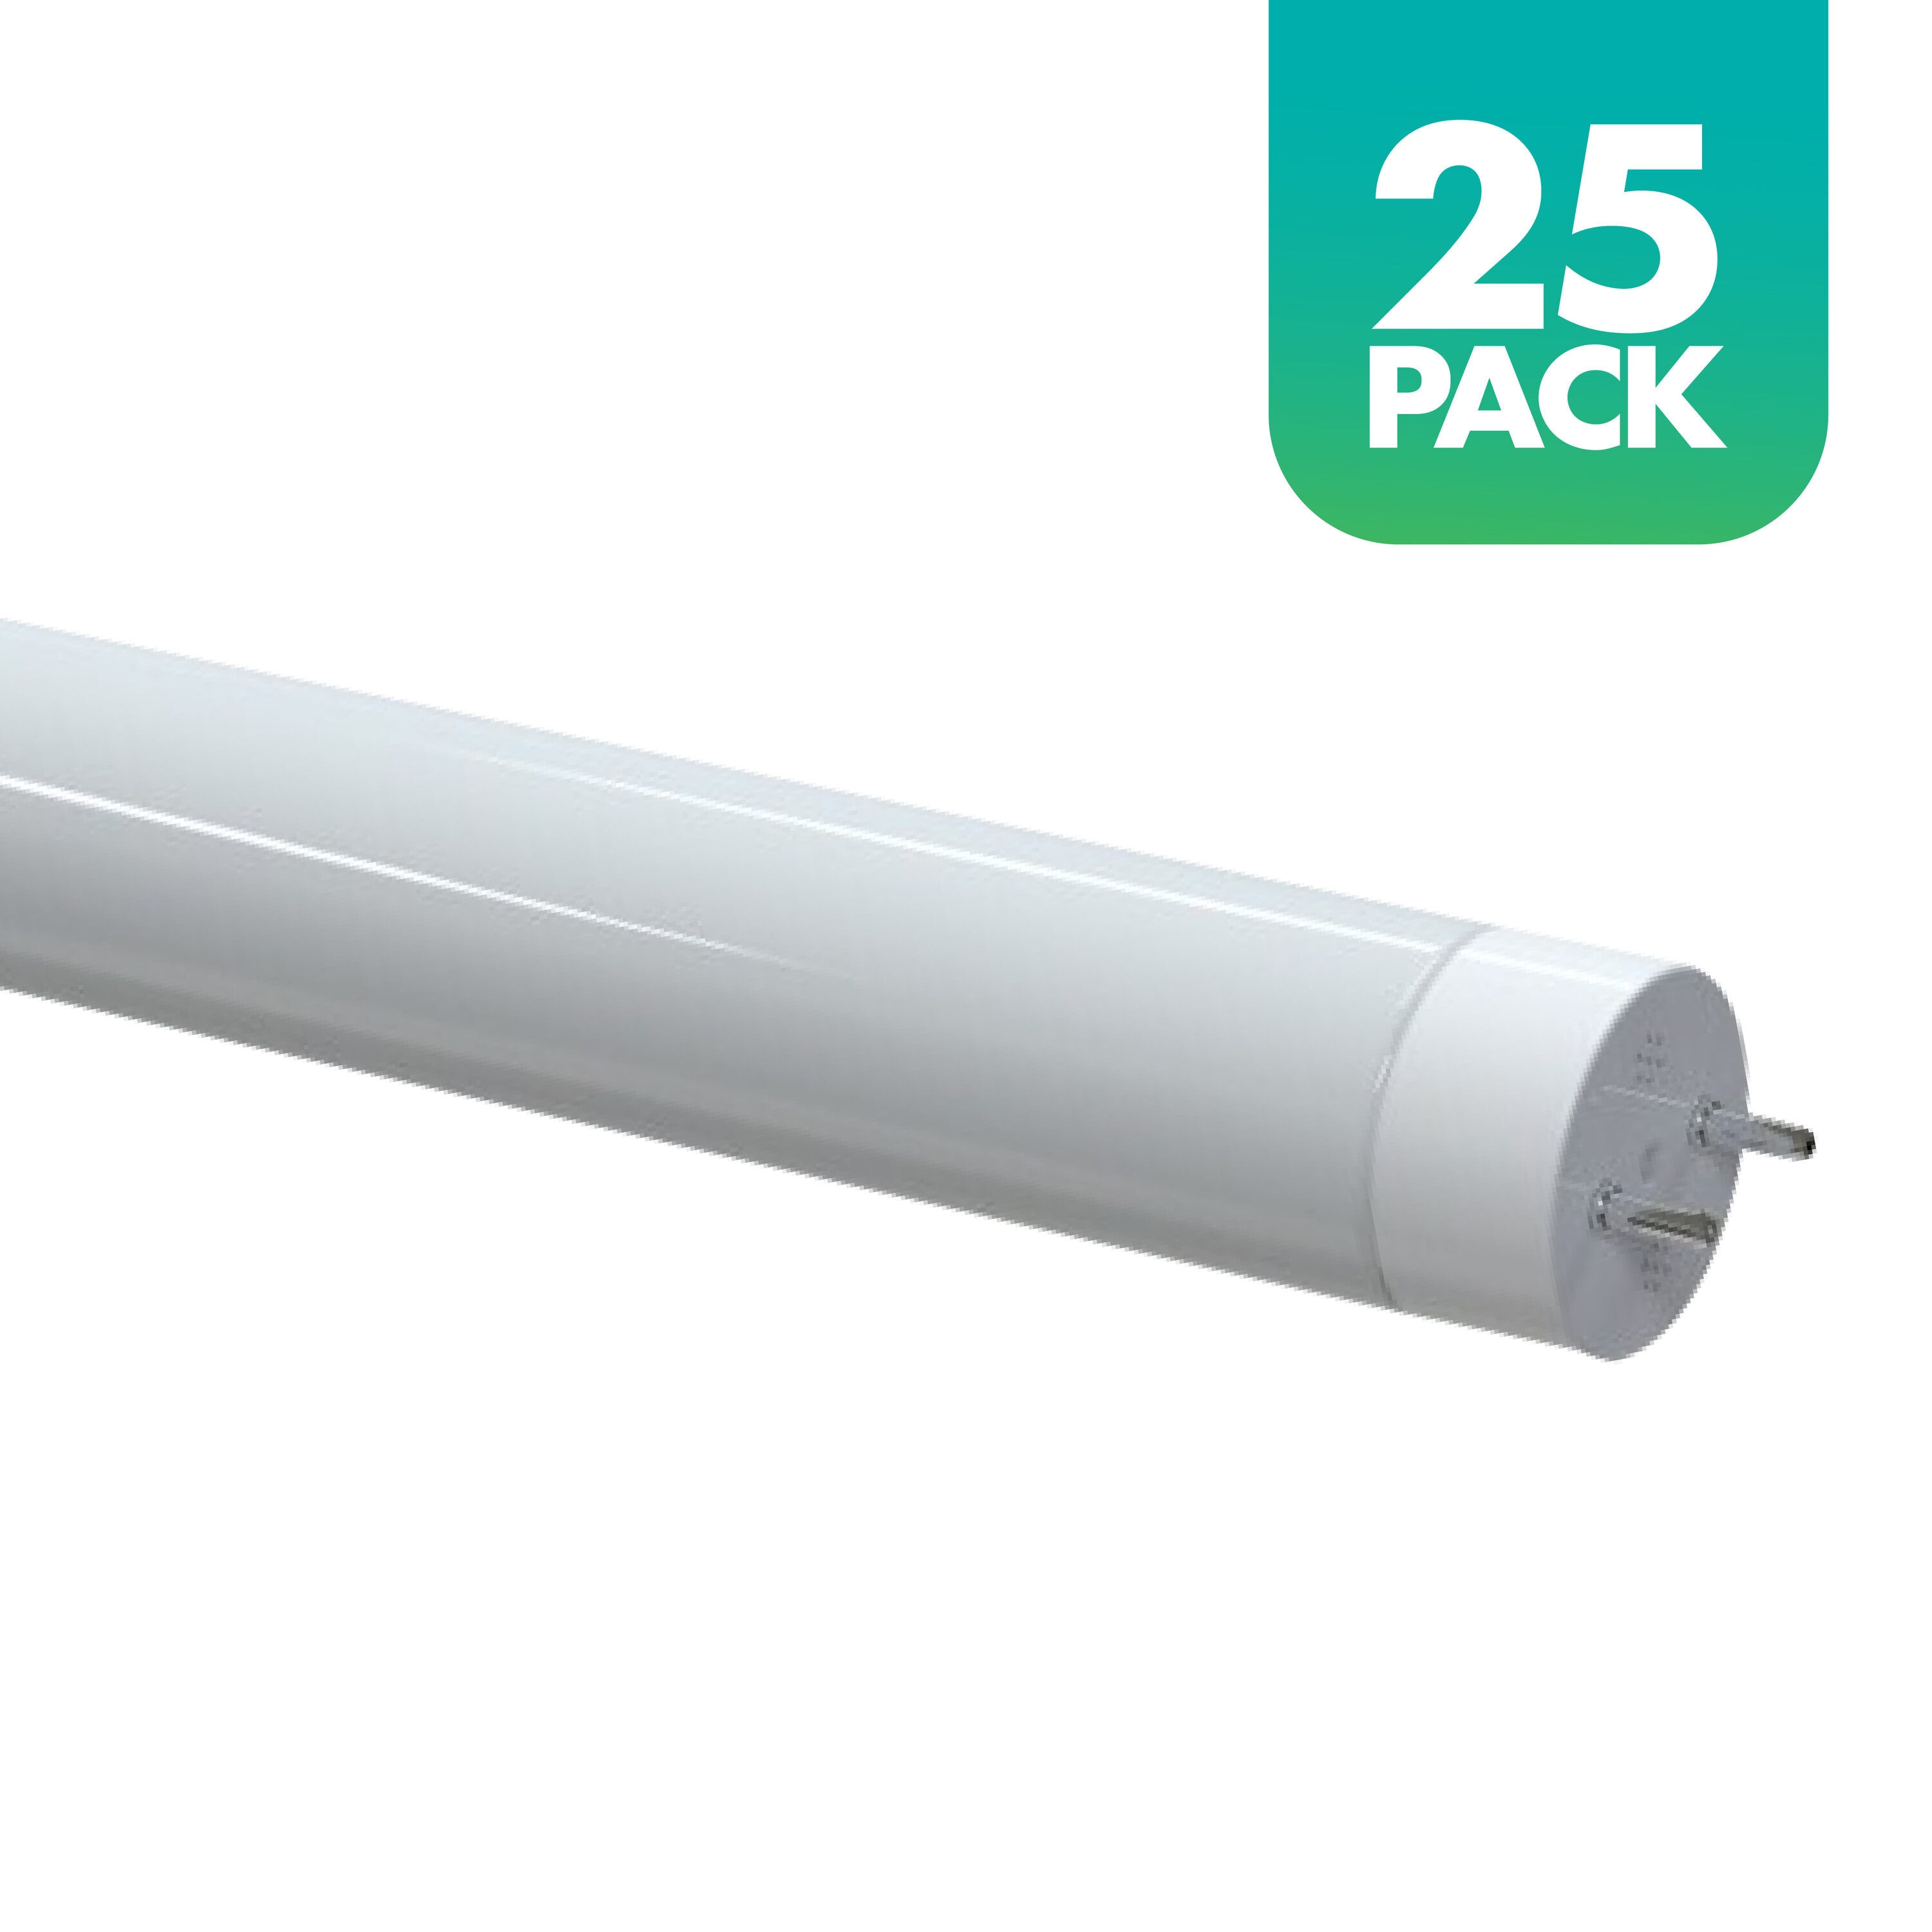 Simply Conserve T8 linear 32-Watt EQ 48-in Cool White Medium Bi-pin (t8) Linear Type A Tube Light Bulb (25-Pack) in LED Tube Light Bulbs department at Lowes.com